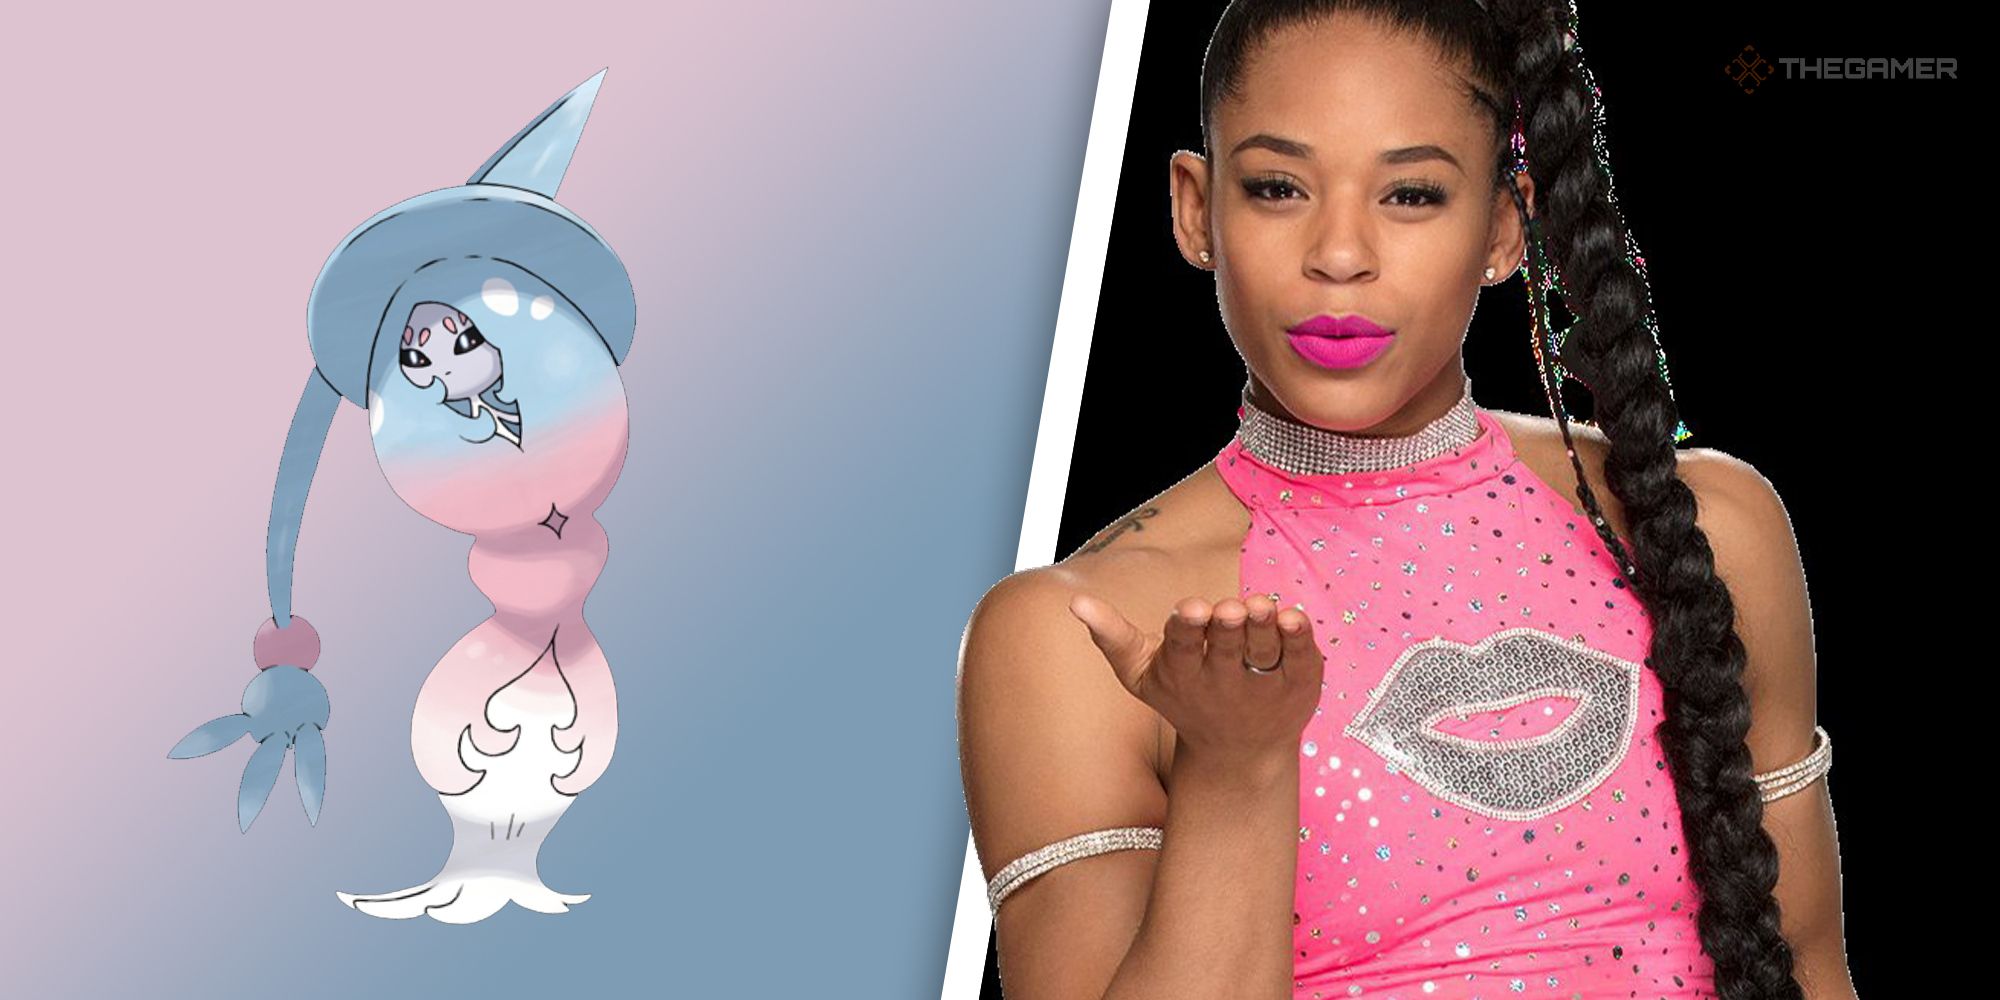 Heres 30 Wrestlers As Pokemon For The Royal Rumble (20)